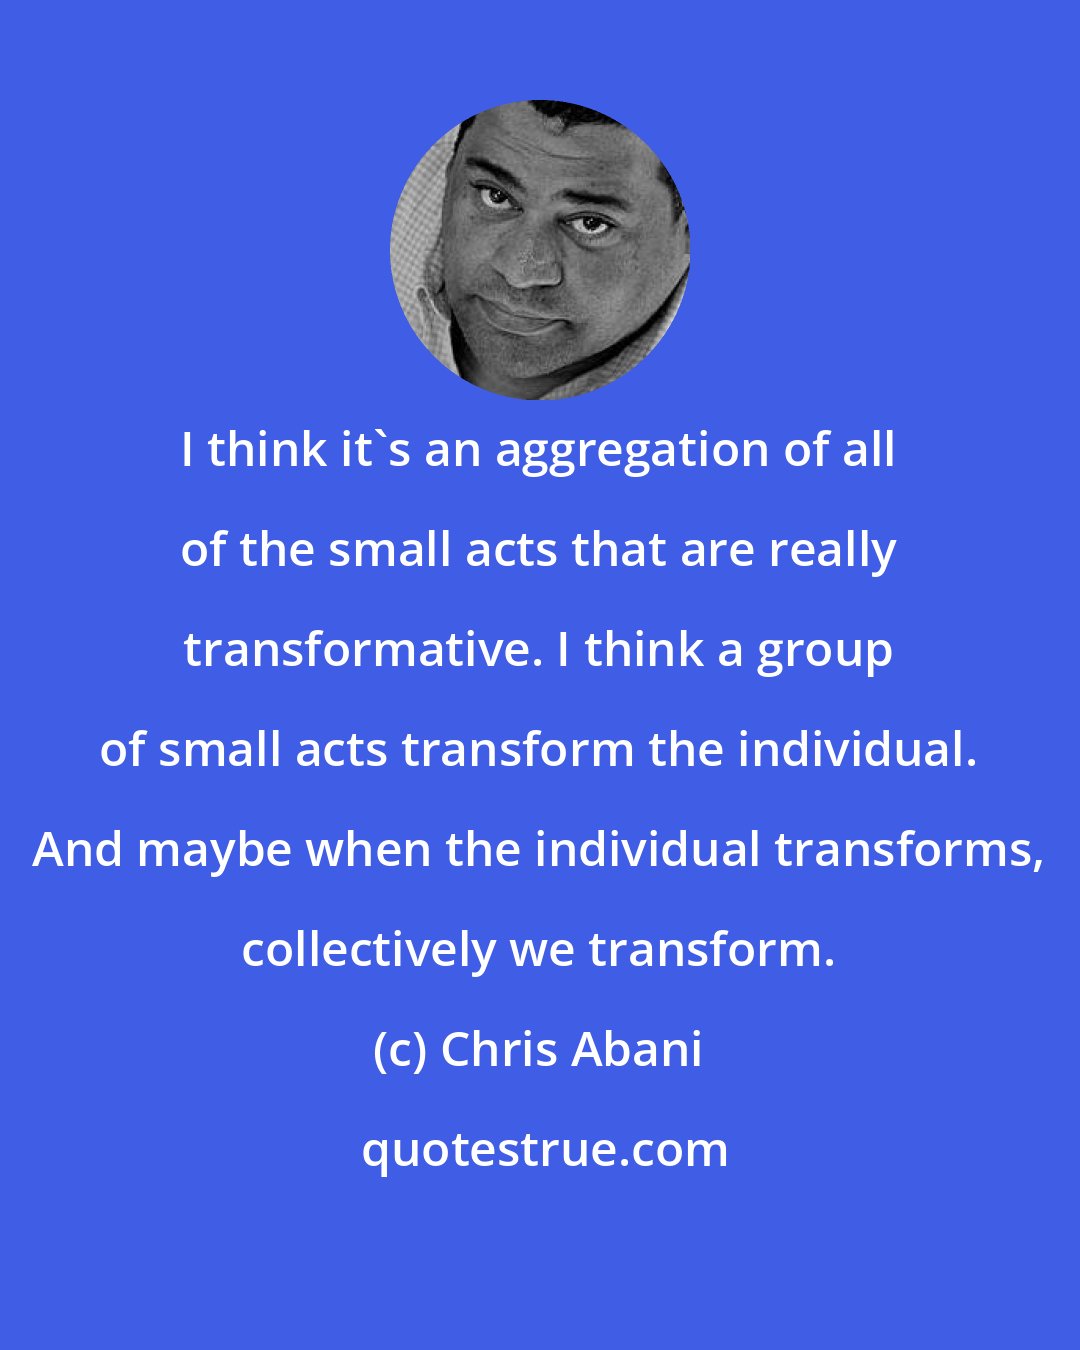 Chris Abani: I think it's an aggregation of all of the small acts that are really transformative. I think a group of small acts transform the individual. And maybe when the individual transforms, collectively we transform.